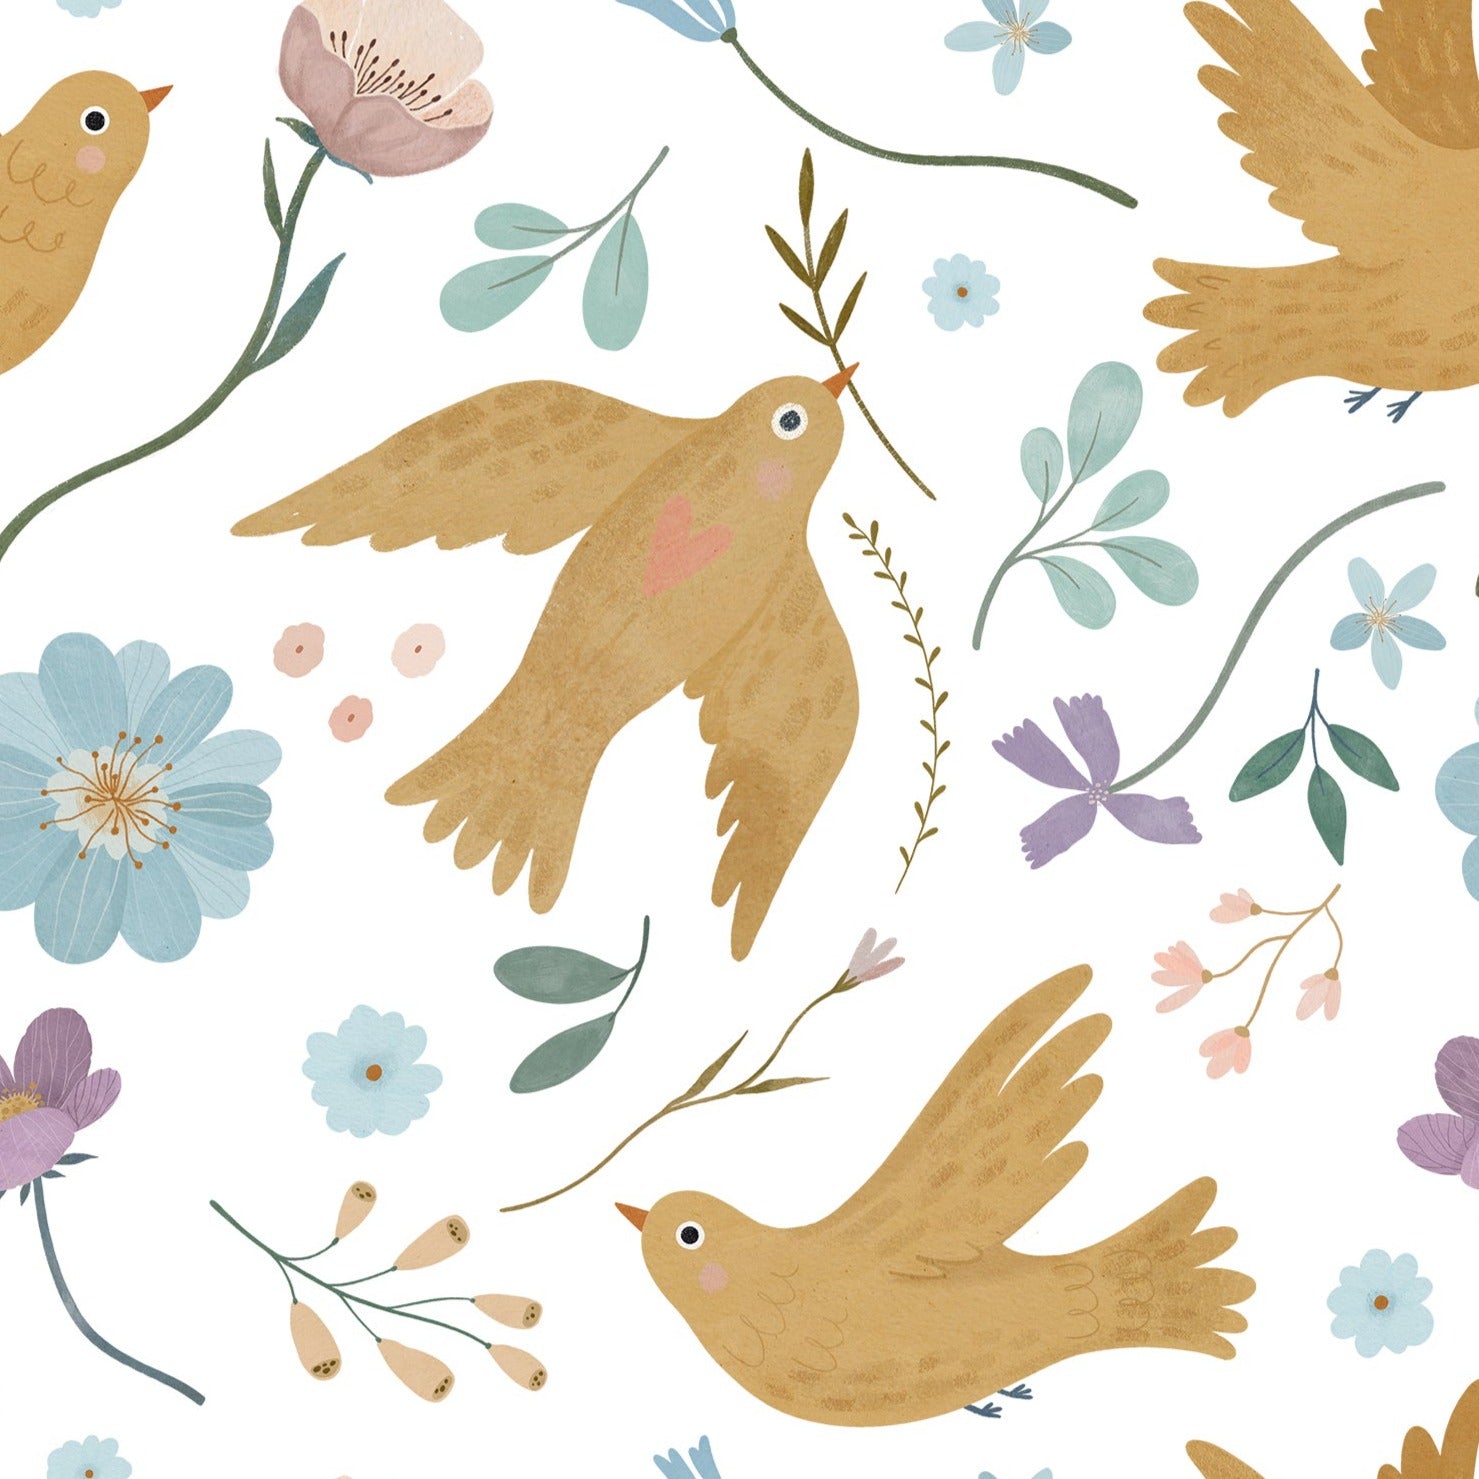 Close-up view of the Pastel Bird Wallpaper, featuring golden birds surrounded by delicate pastel flowers and green foliage, offering a cheerful and vibrant pattern.